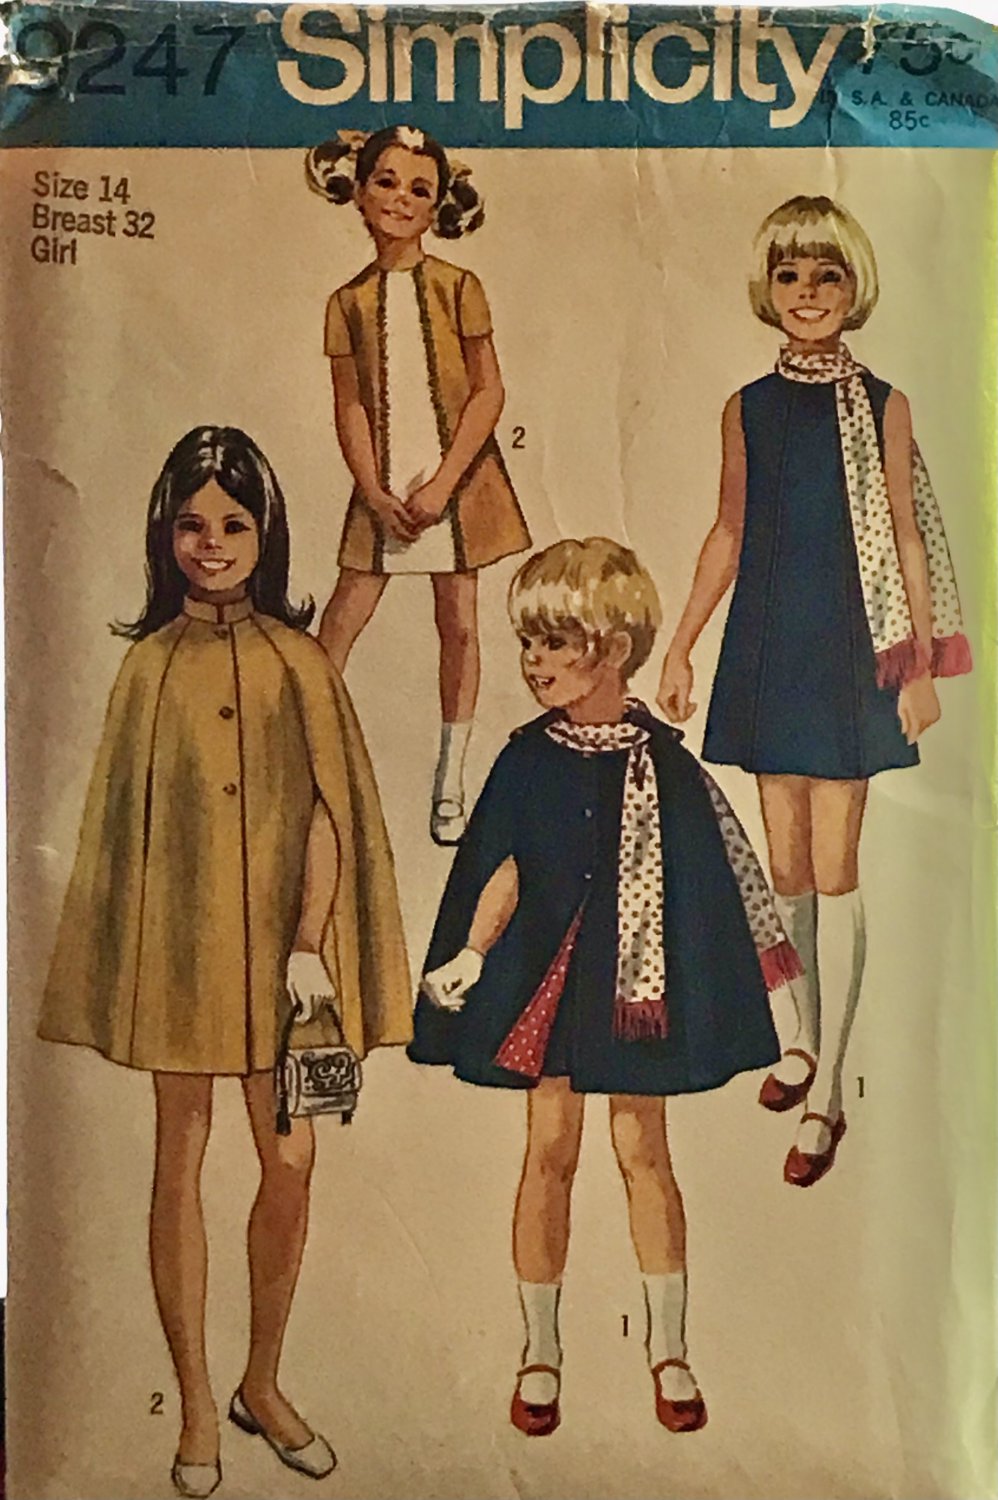 Simplicity 9247 Girls' Dress, Cape and Scarf Sewing Pattern size 14 bust 32